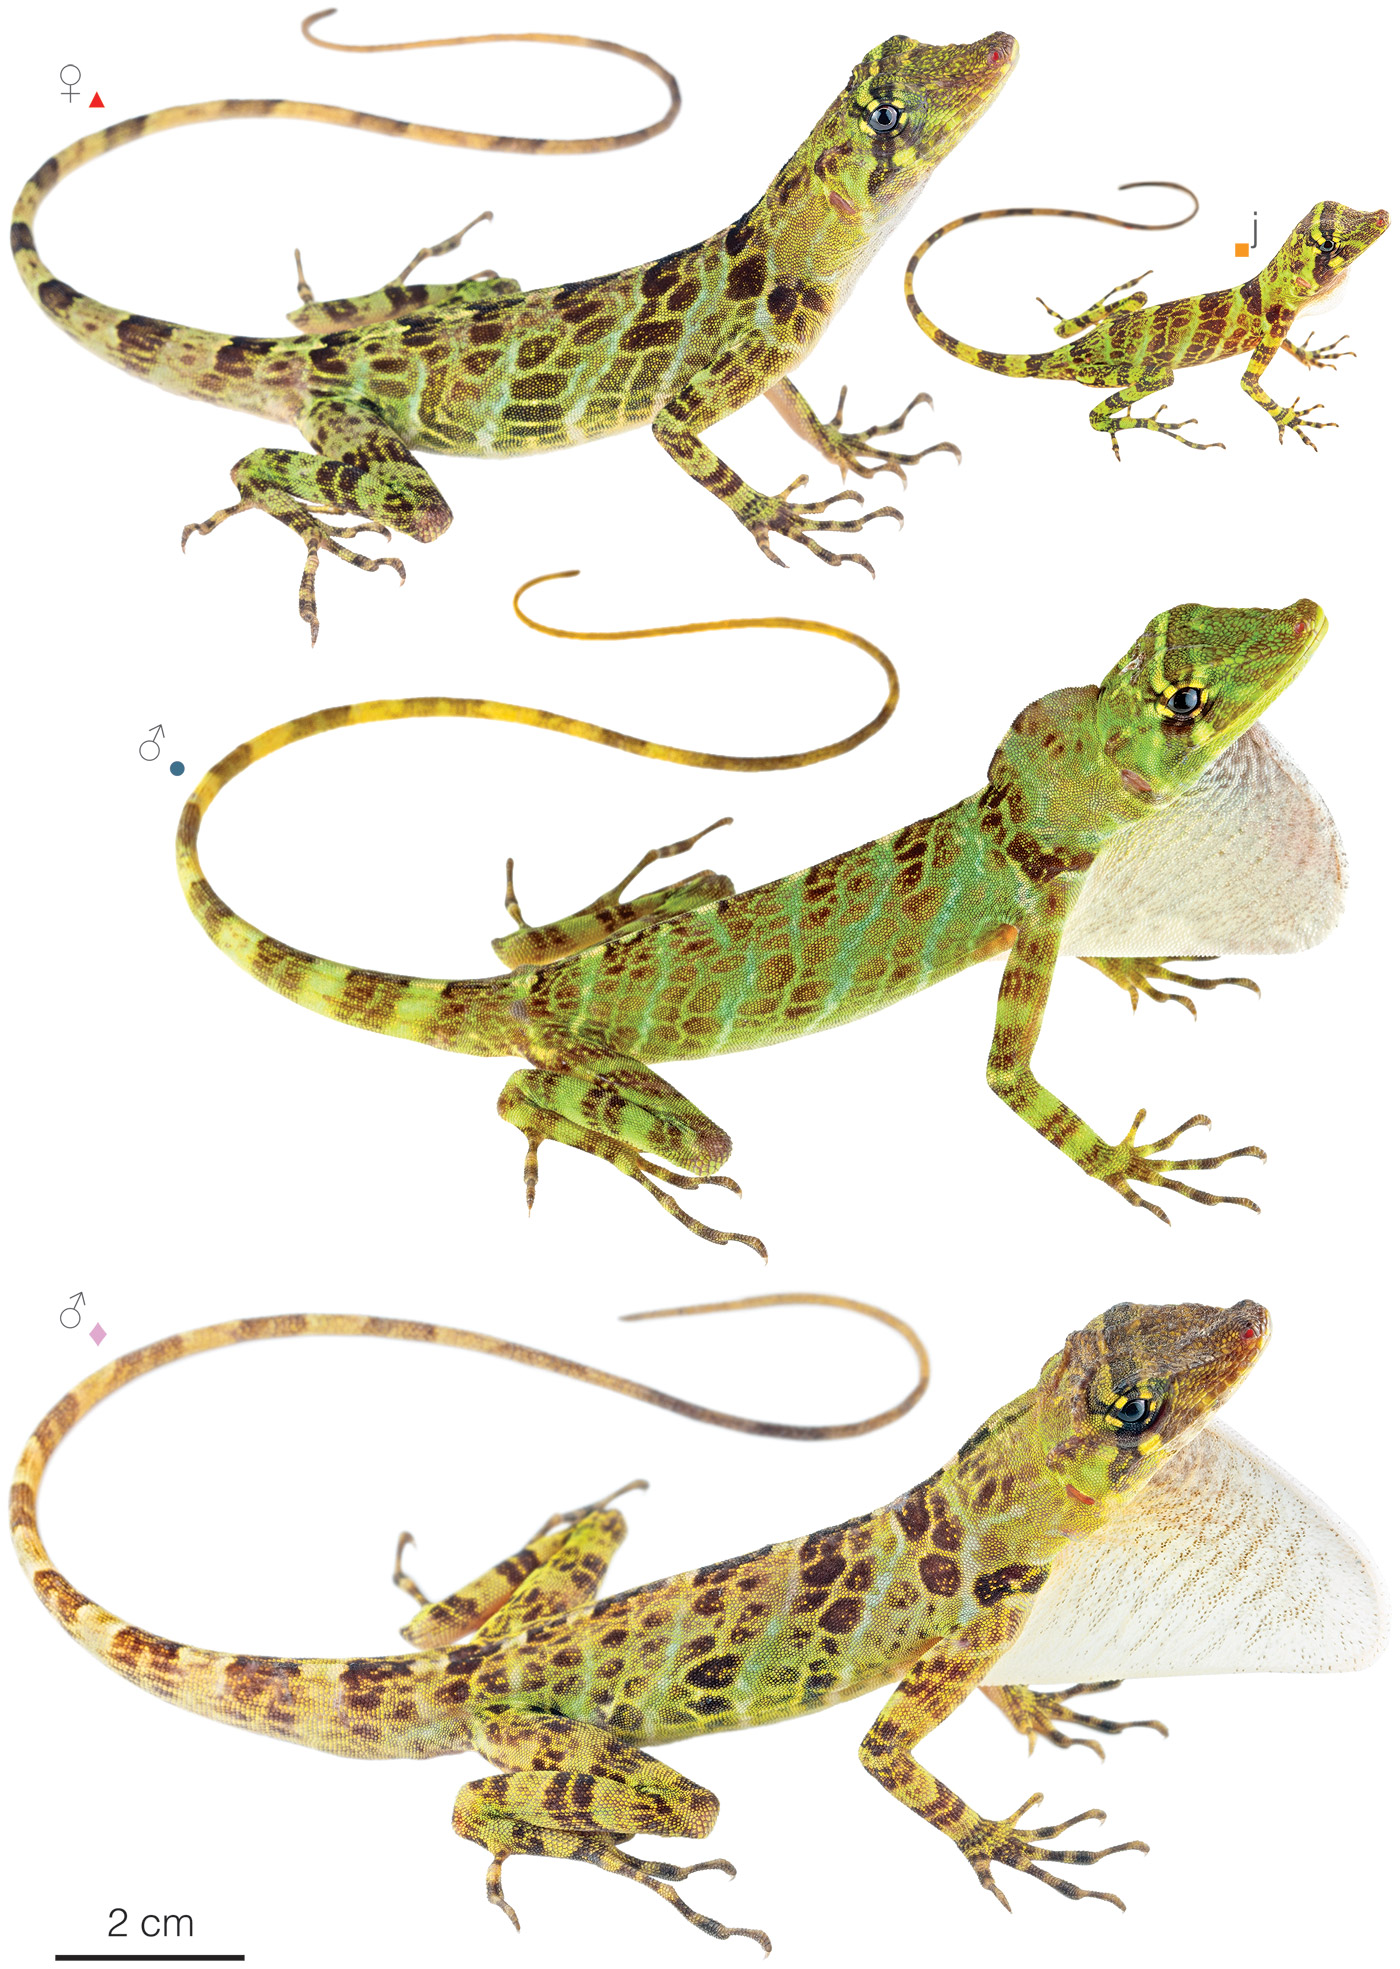 Figure showing variation among individuals of Anolis princeps